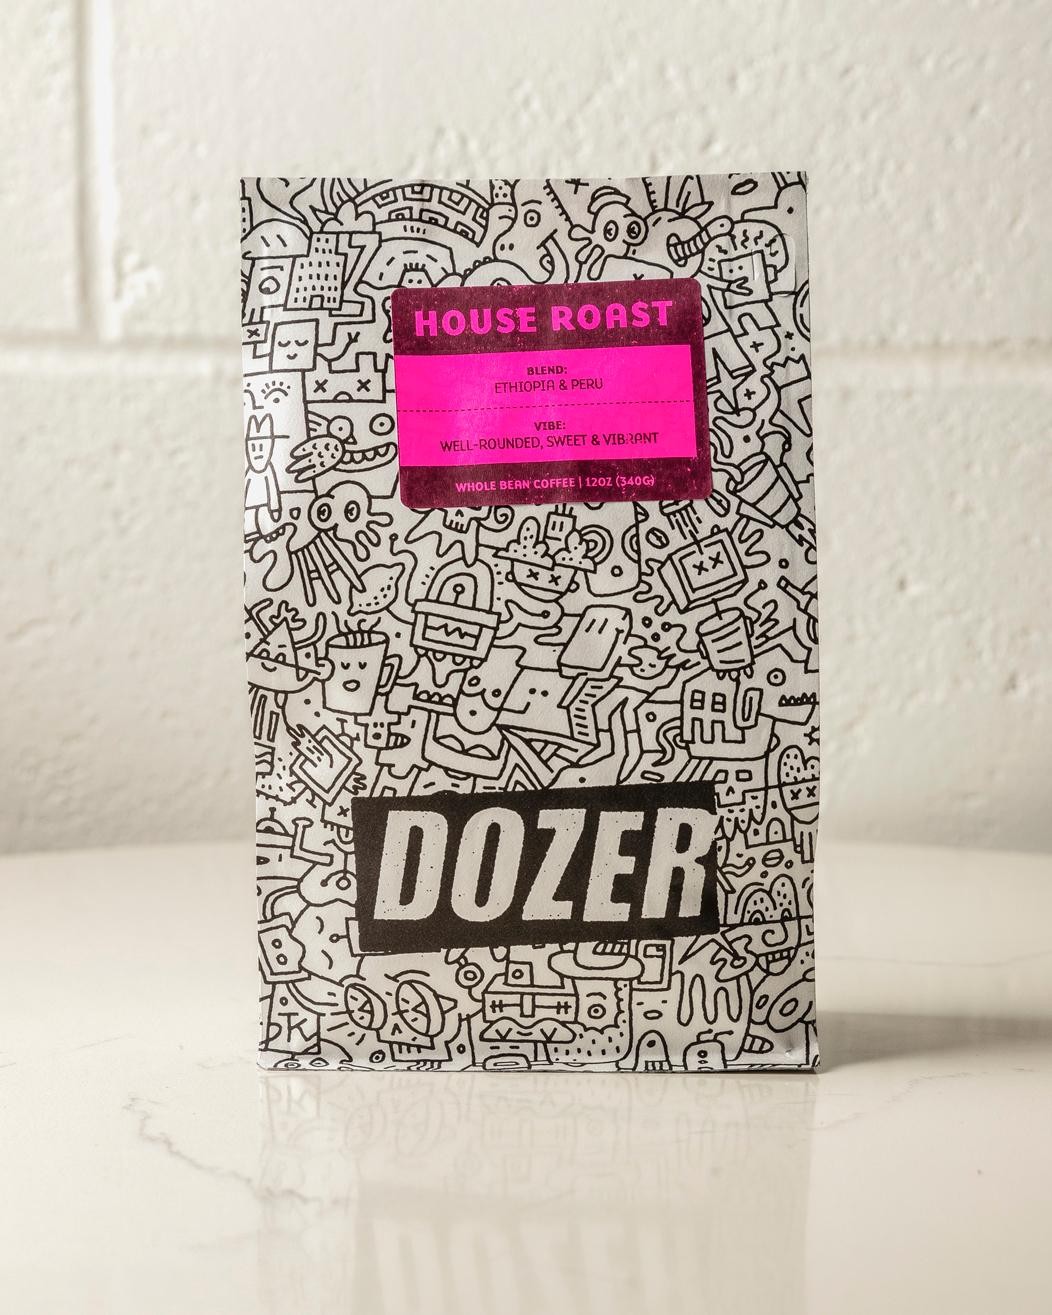 Whole Bean Coffee: Point Nothing by Dozer